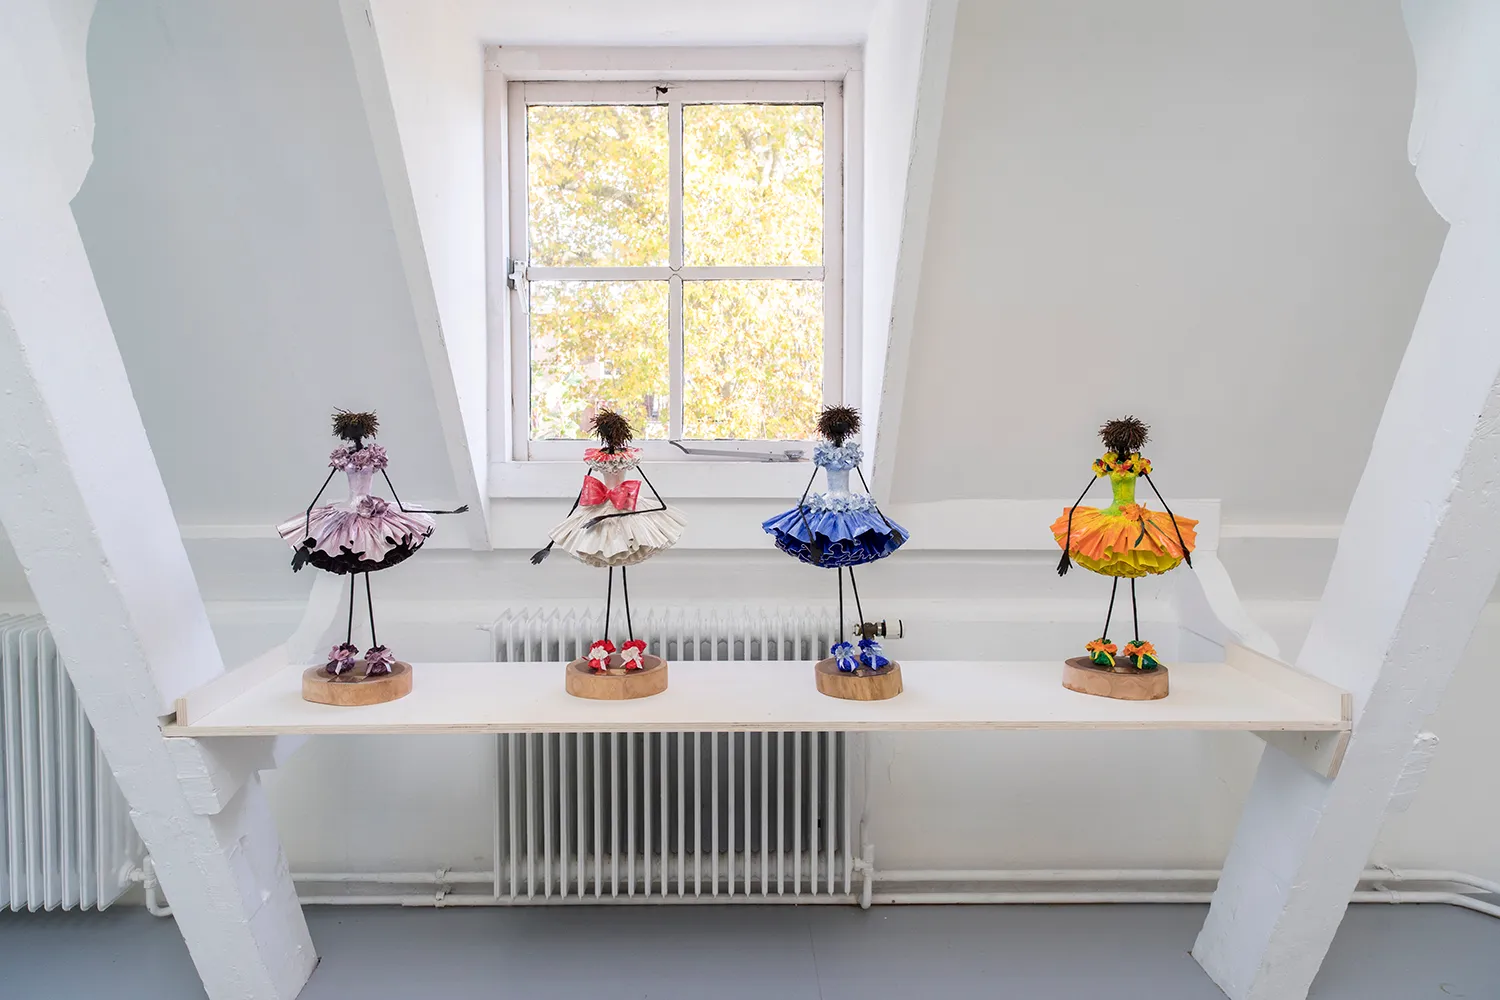 Four little black dolls with thin arms and legs wearing colourful tutu's and shoes